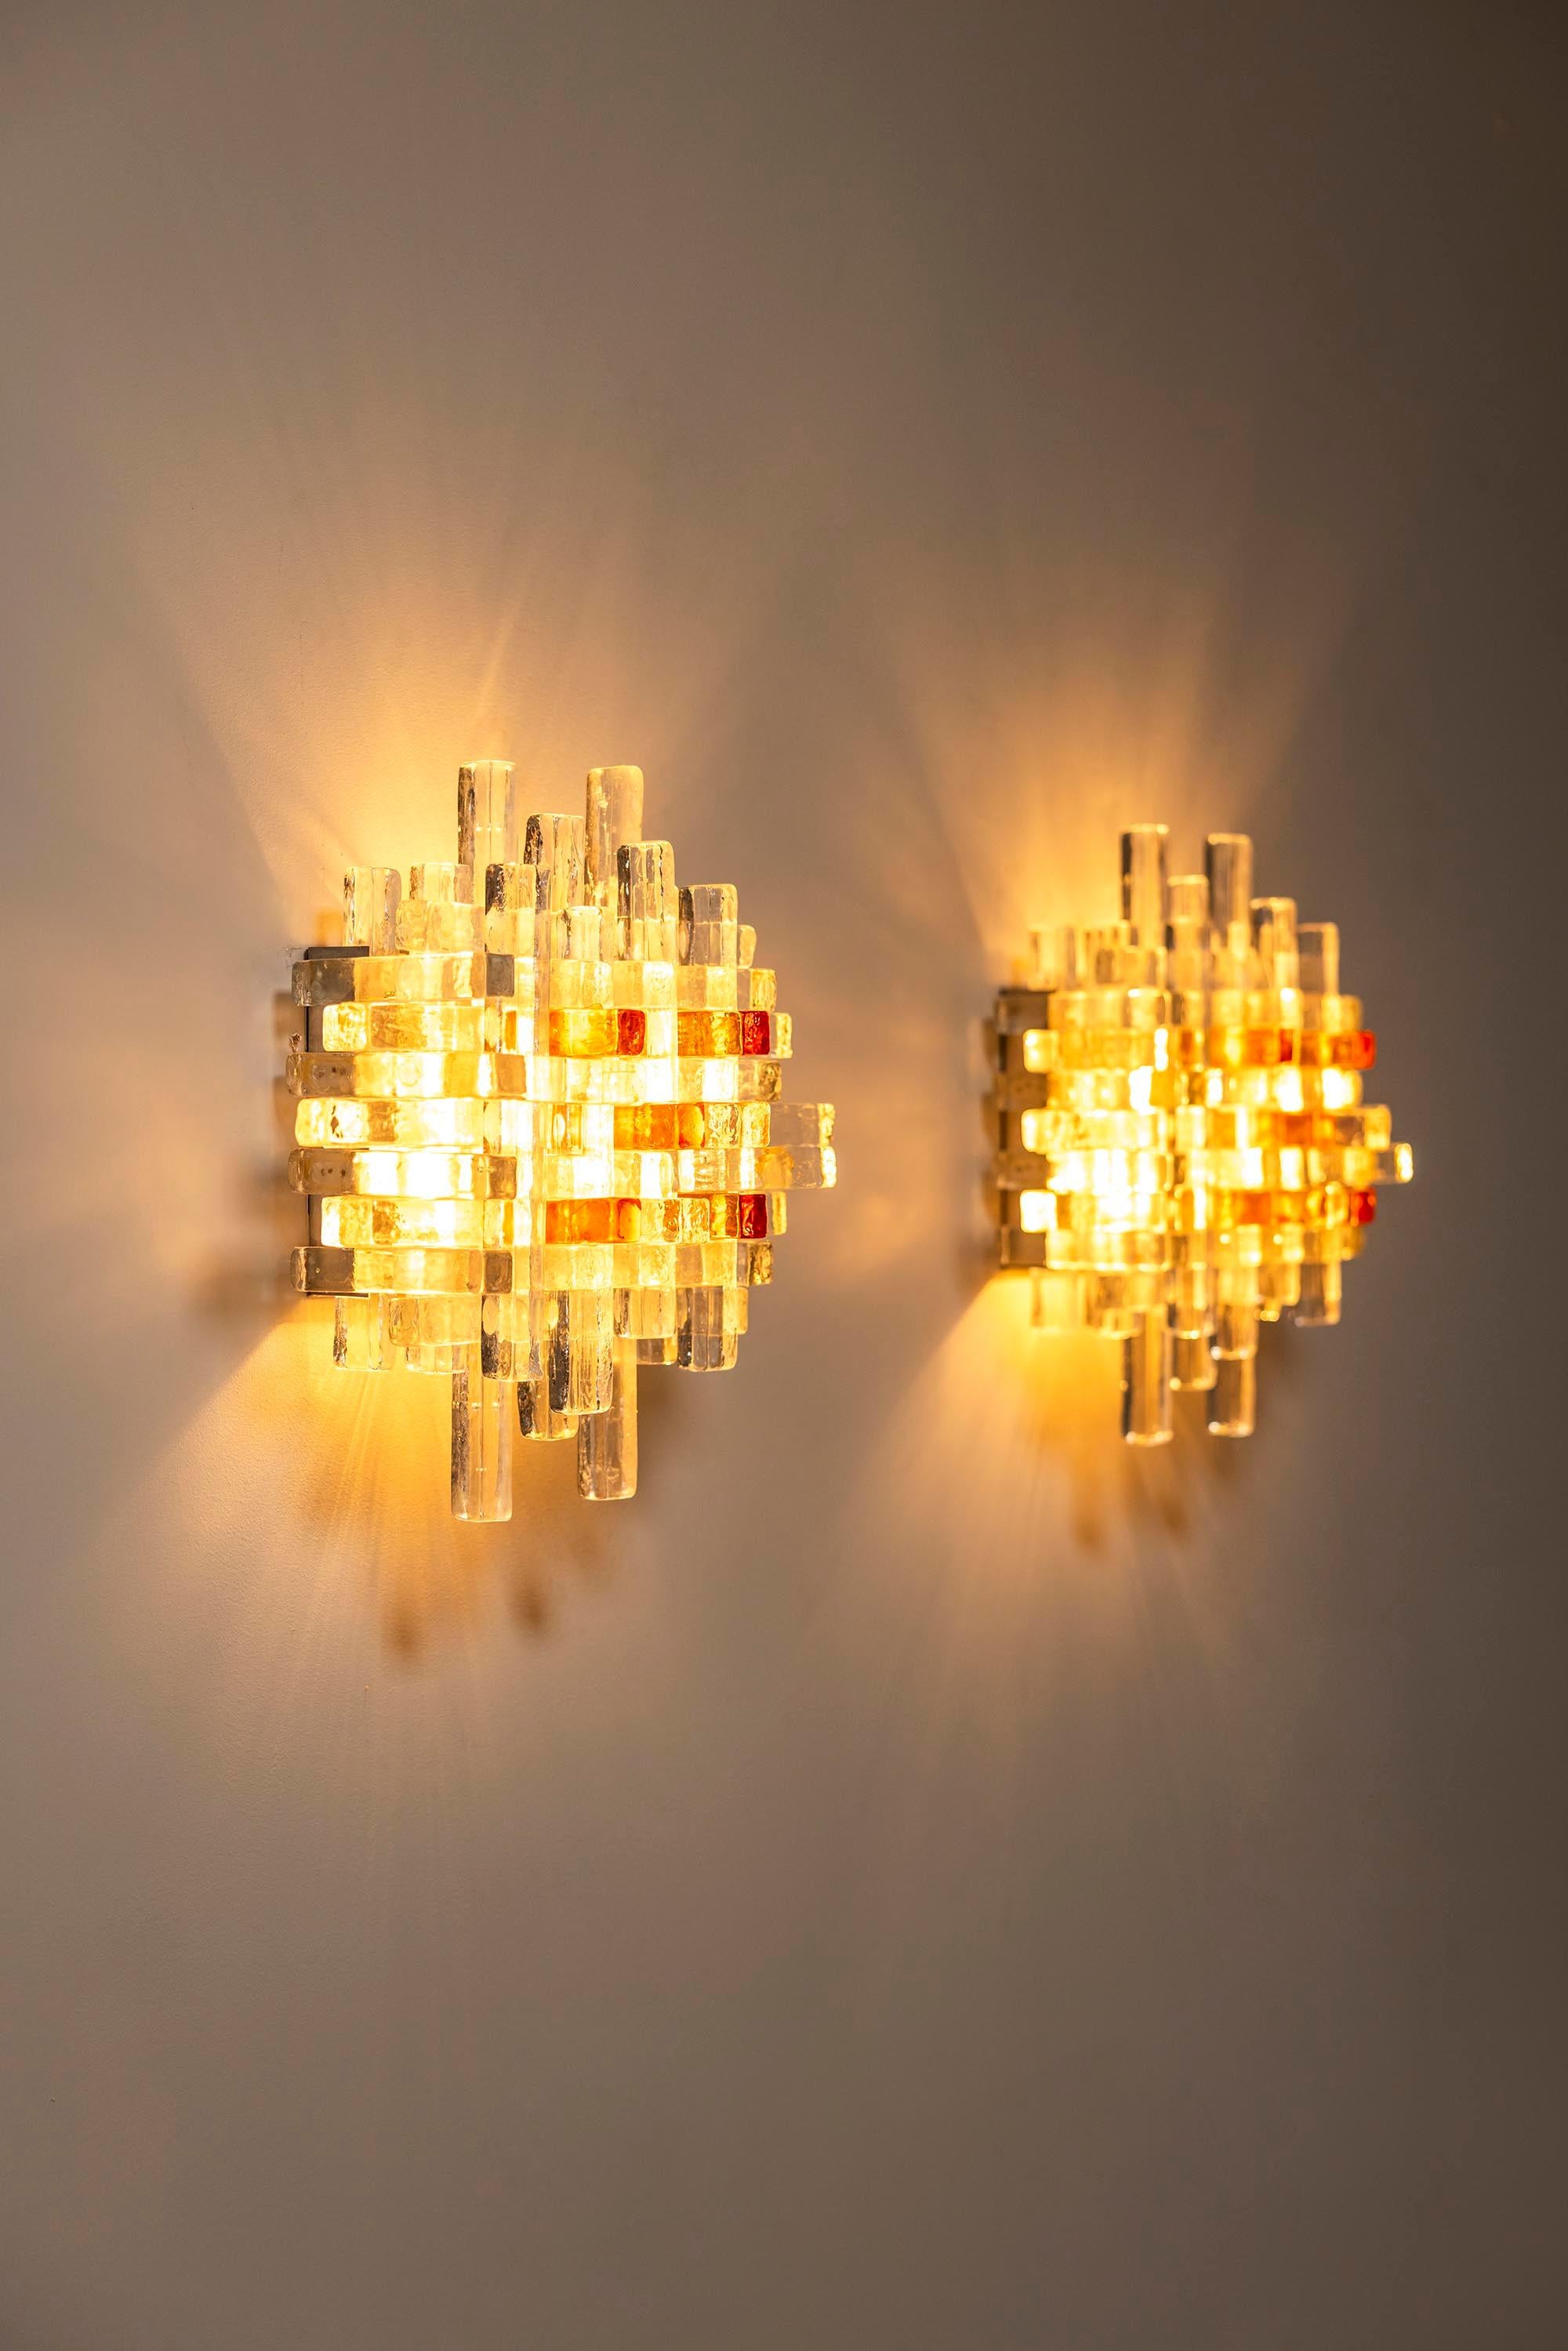 The lamps of maestro glass artist Albano Poli, which he manufactured and released under his PoliArte label, are often of undeniable beauty. To be fair, Murano glass needs very little to be loved by its viewer, but Poli's compositions of the